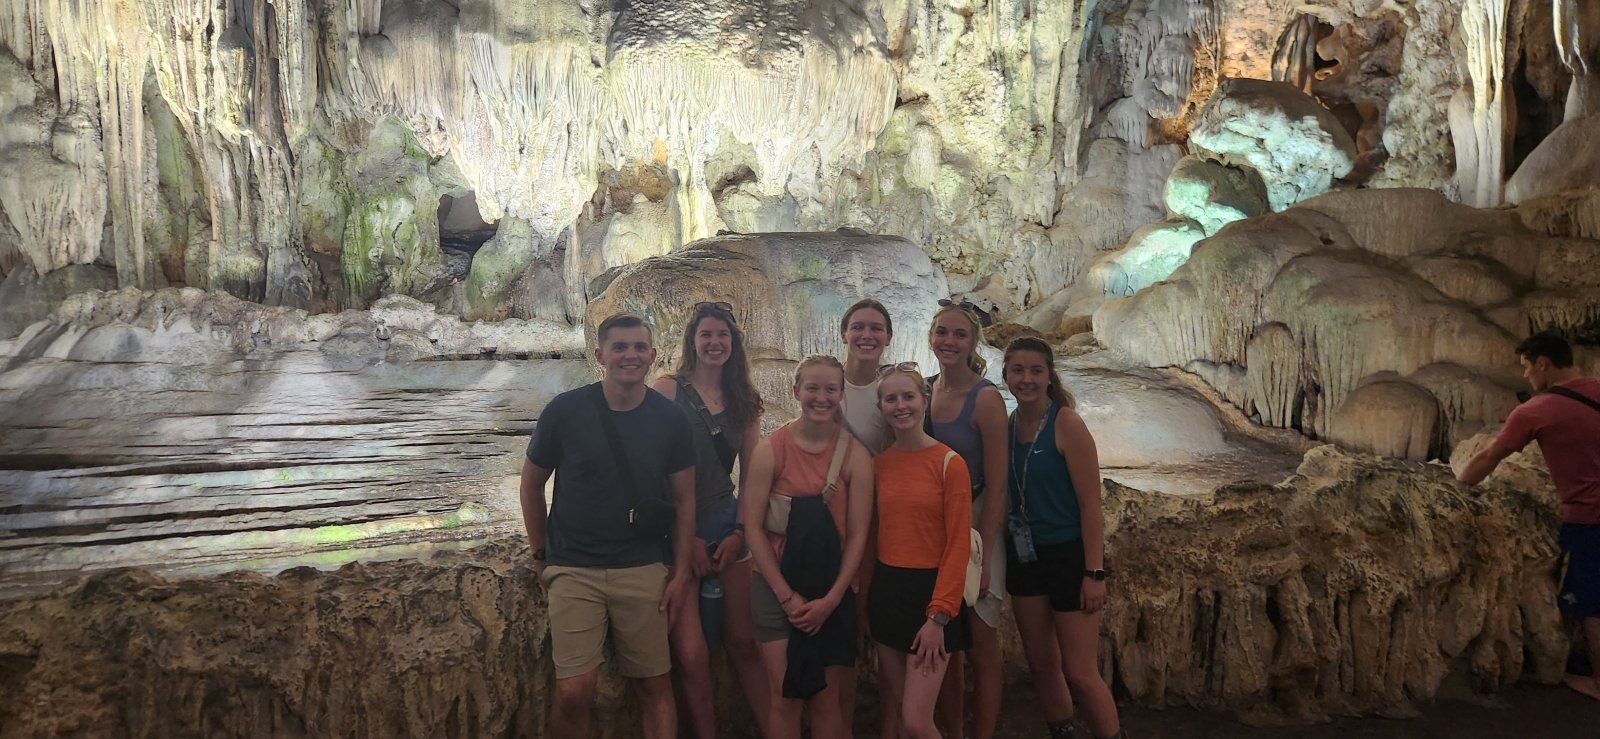 Honors students exploring a cave in Halong Bay, Vietnam